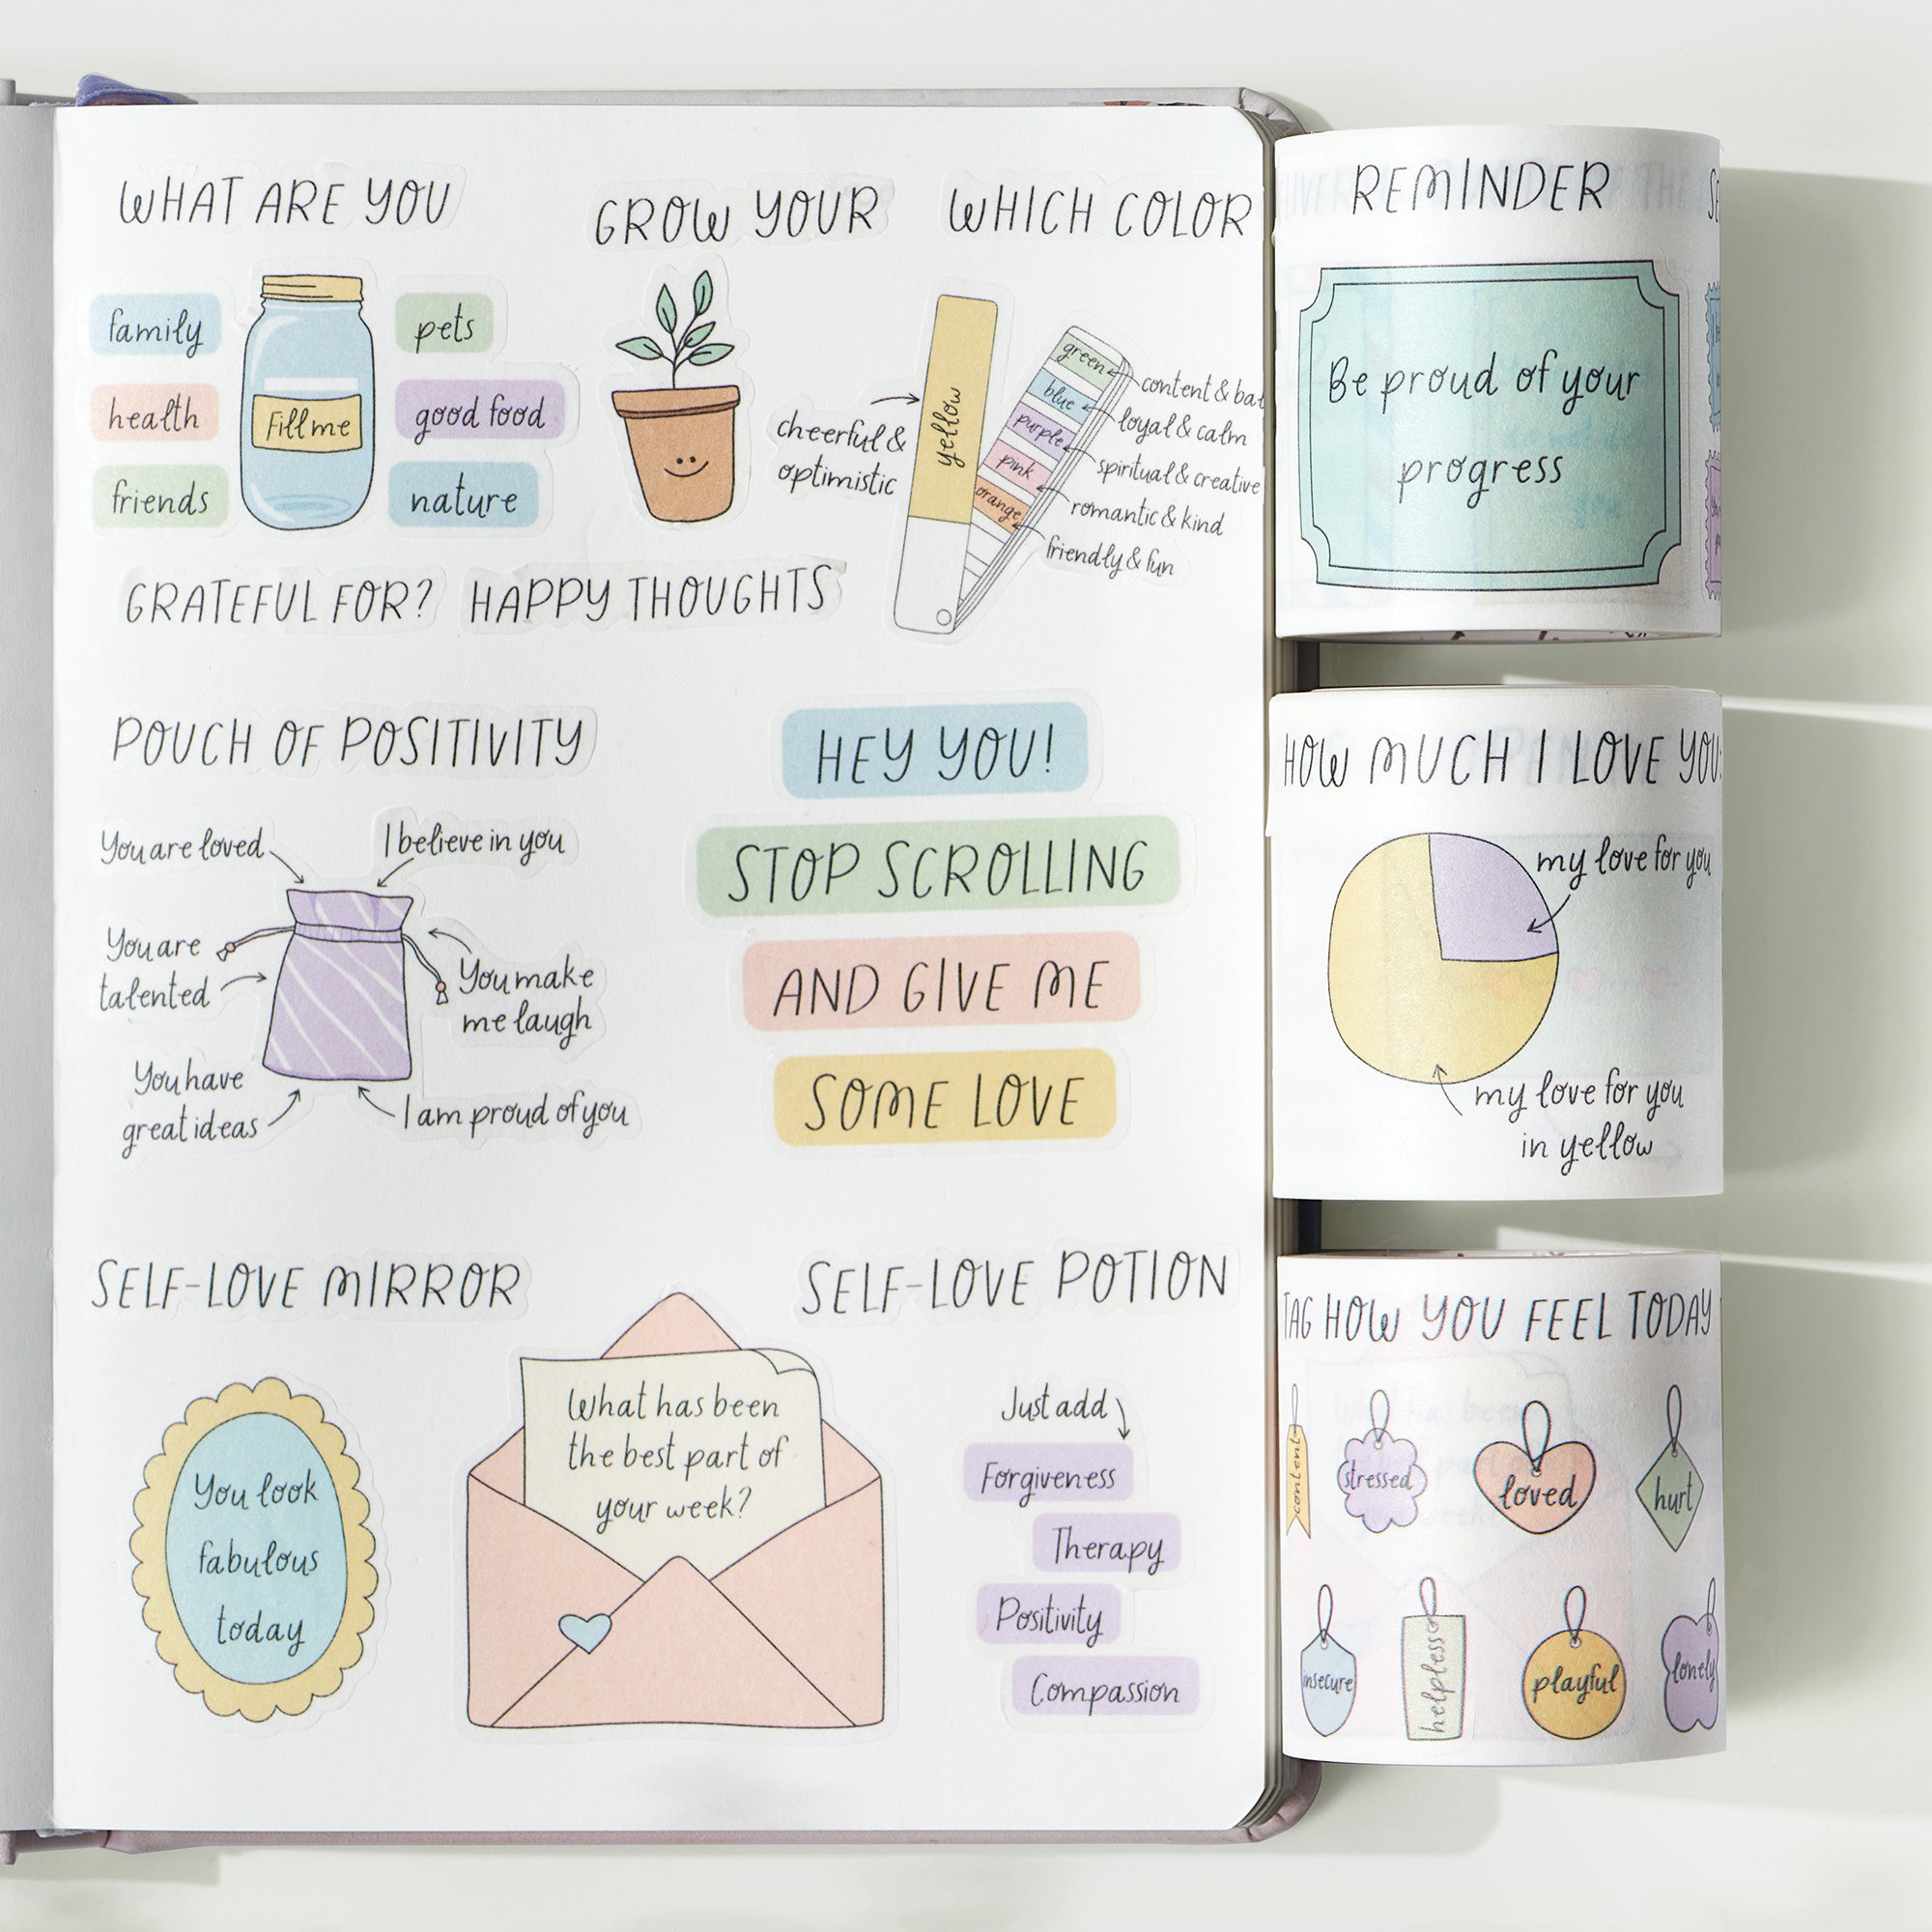 Doodle Delight Washi Tape Sticker Set | The Washi Tape Shop. Beautiful Washi and Decorative Tape For Bullet Journals, Gift Wrapping, Planner Decoration and DIY Projects